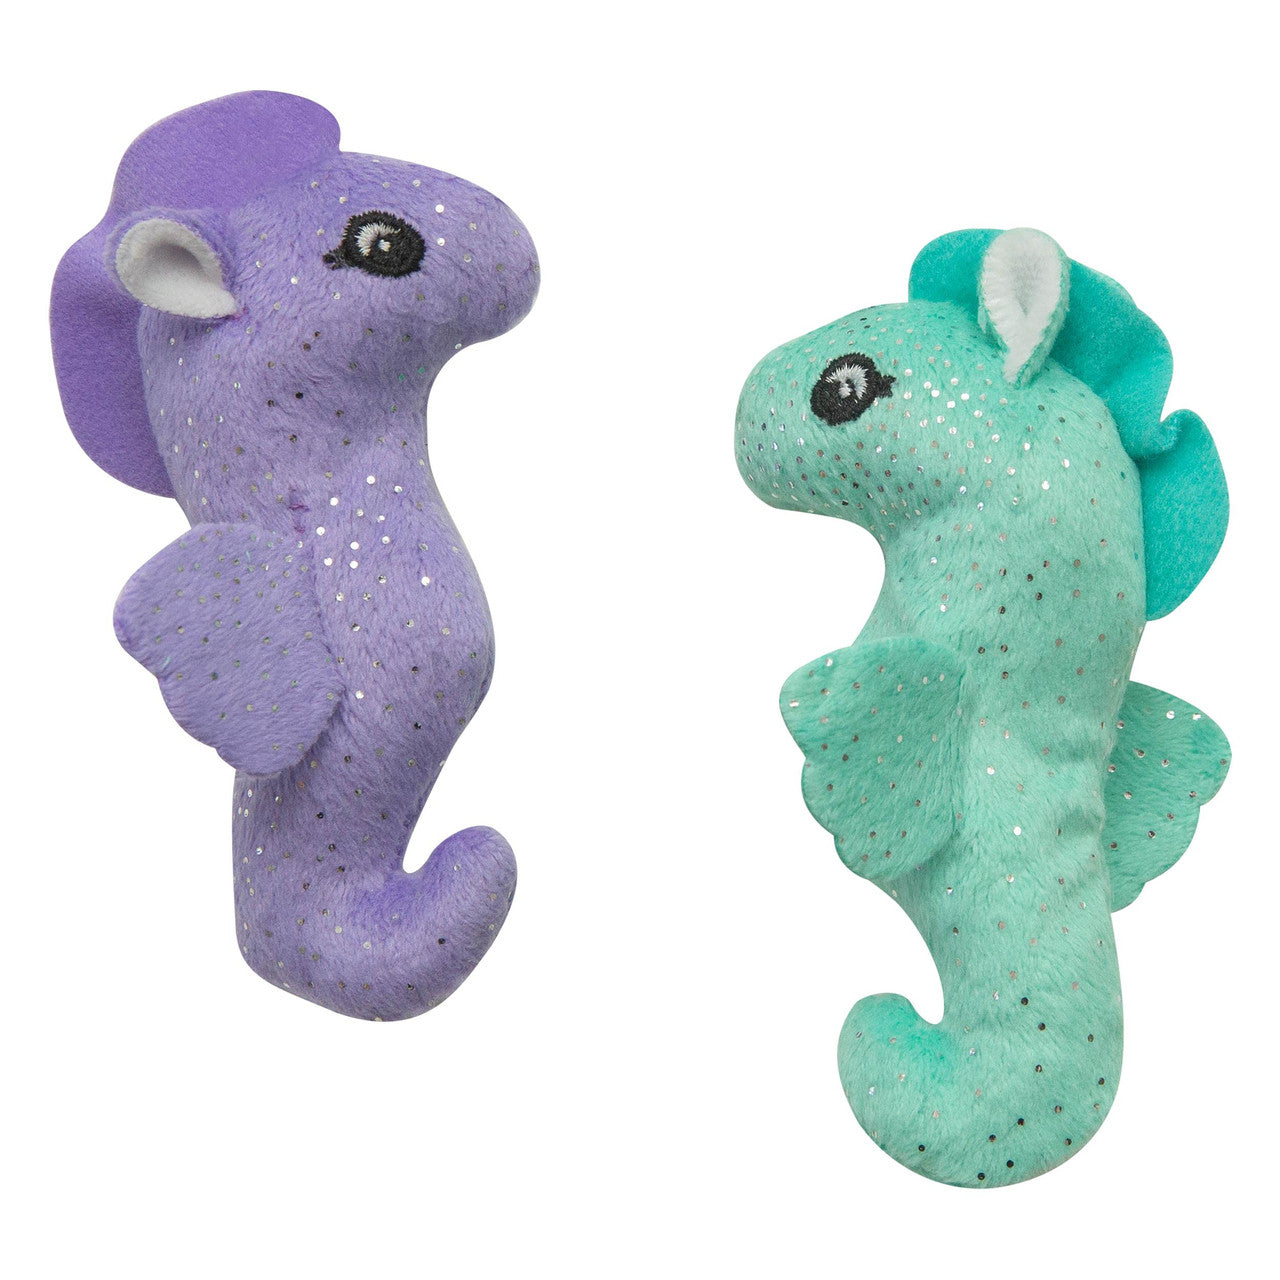 Kitty Seahorse with Catnip 2 pack 712038963980